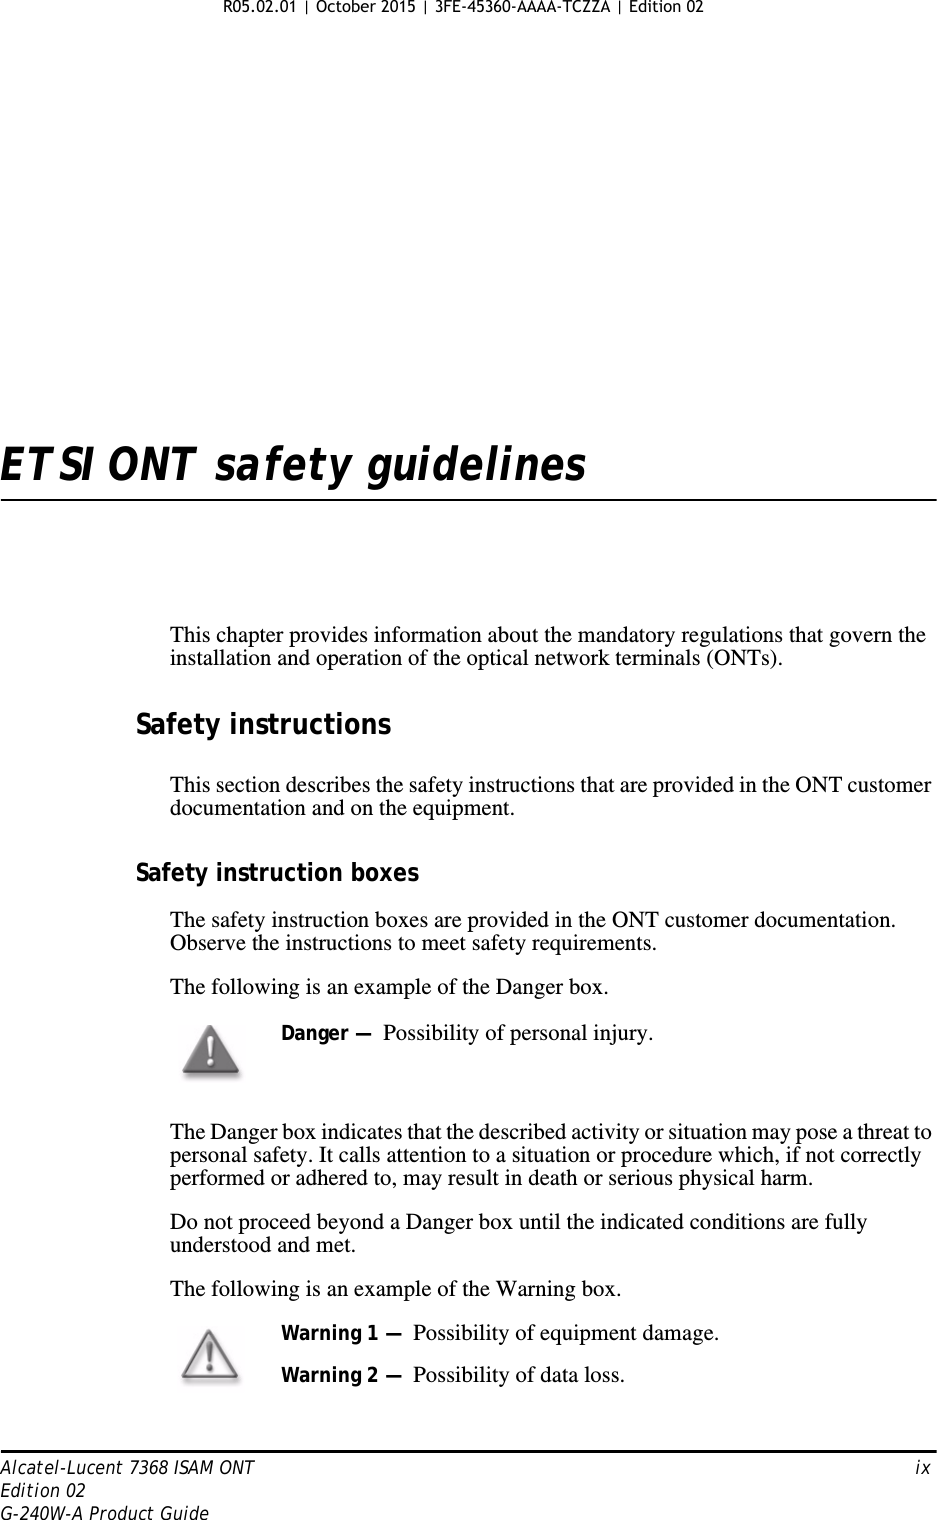 Alcatel-Lucent 7368 ISAM ONT   ixEdition 02G-240W-A Product GuideETSI ONT safety guidelinesThis chapter provides information about the mandatory regulations that govern the installation and operation of the optical network terminals (ONTs).Safety instructionsThis section describes the safety instructions that are provided in the ONT customer documentation and on the equipment.Safety instruction boxesThe safety instruction boxes are provided in the ONT customer documentation. Observe the instructions to meet safety requirements.The following is an example of the Danger box.The Danger box indicates that the described activity or situation may pose a threat to personal safety. It calls attention to a situation or procedure which, if not correctly performed or adhered to, may result in death or serious physical harm. Do not proceed beyond a Danger box until the indicated conditions are fully understood and met.The following is an example of the Warning box.Danger —  Possibility of personal injury. Warning 1 —  Possibility of equipment damage.Warning 2 —  Possibility of data loss. R05.02.01 | October 2015 | 3FE-45360-AAAA-TCZZA | Edition 02 